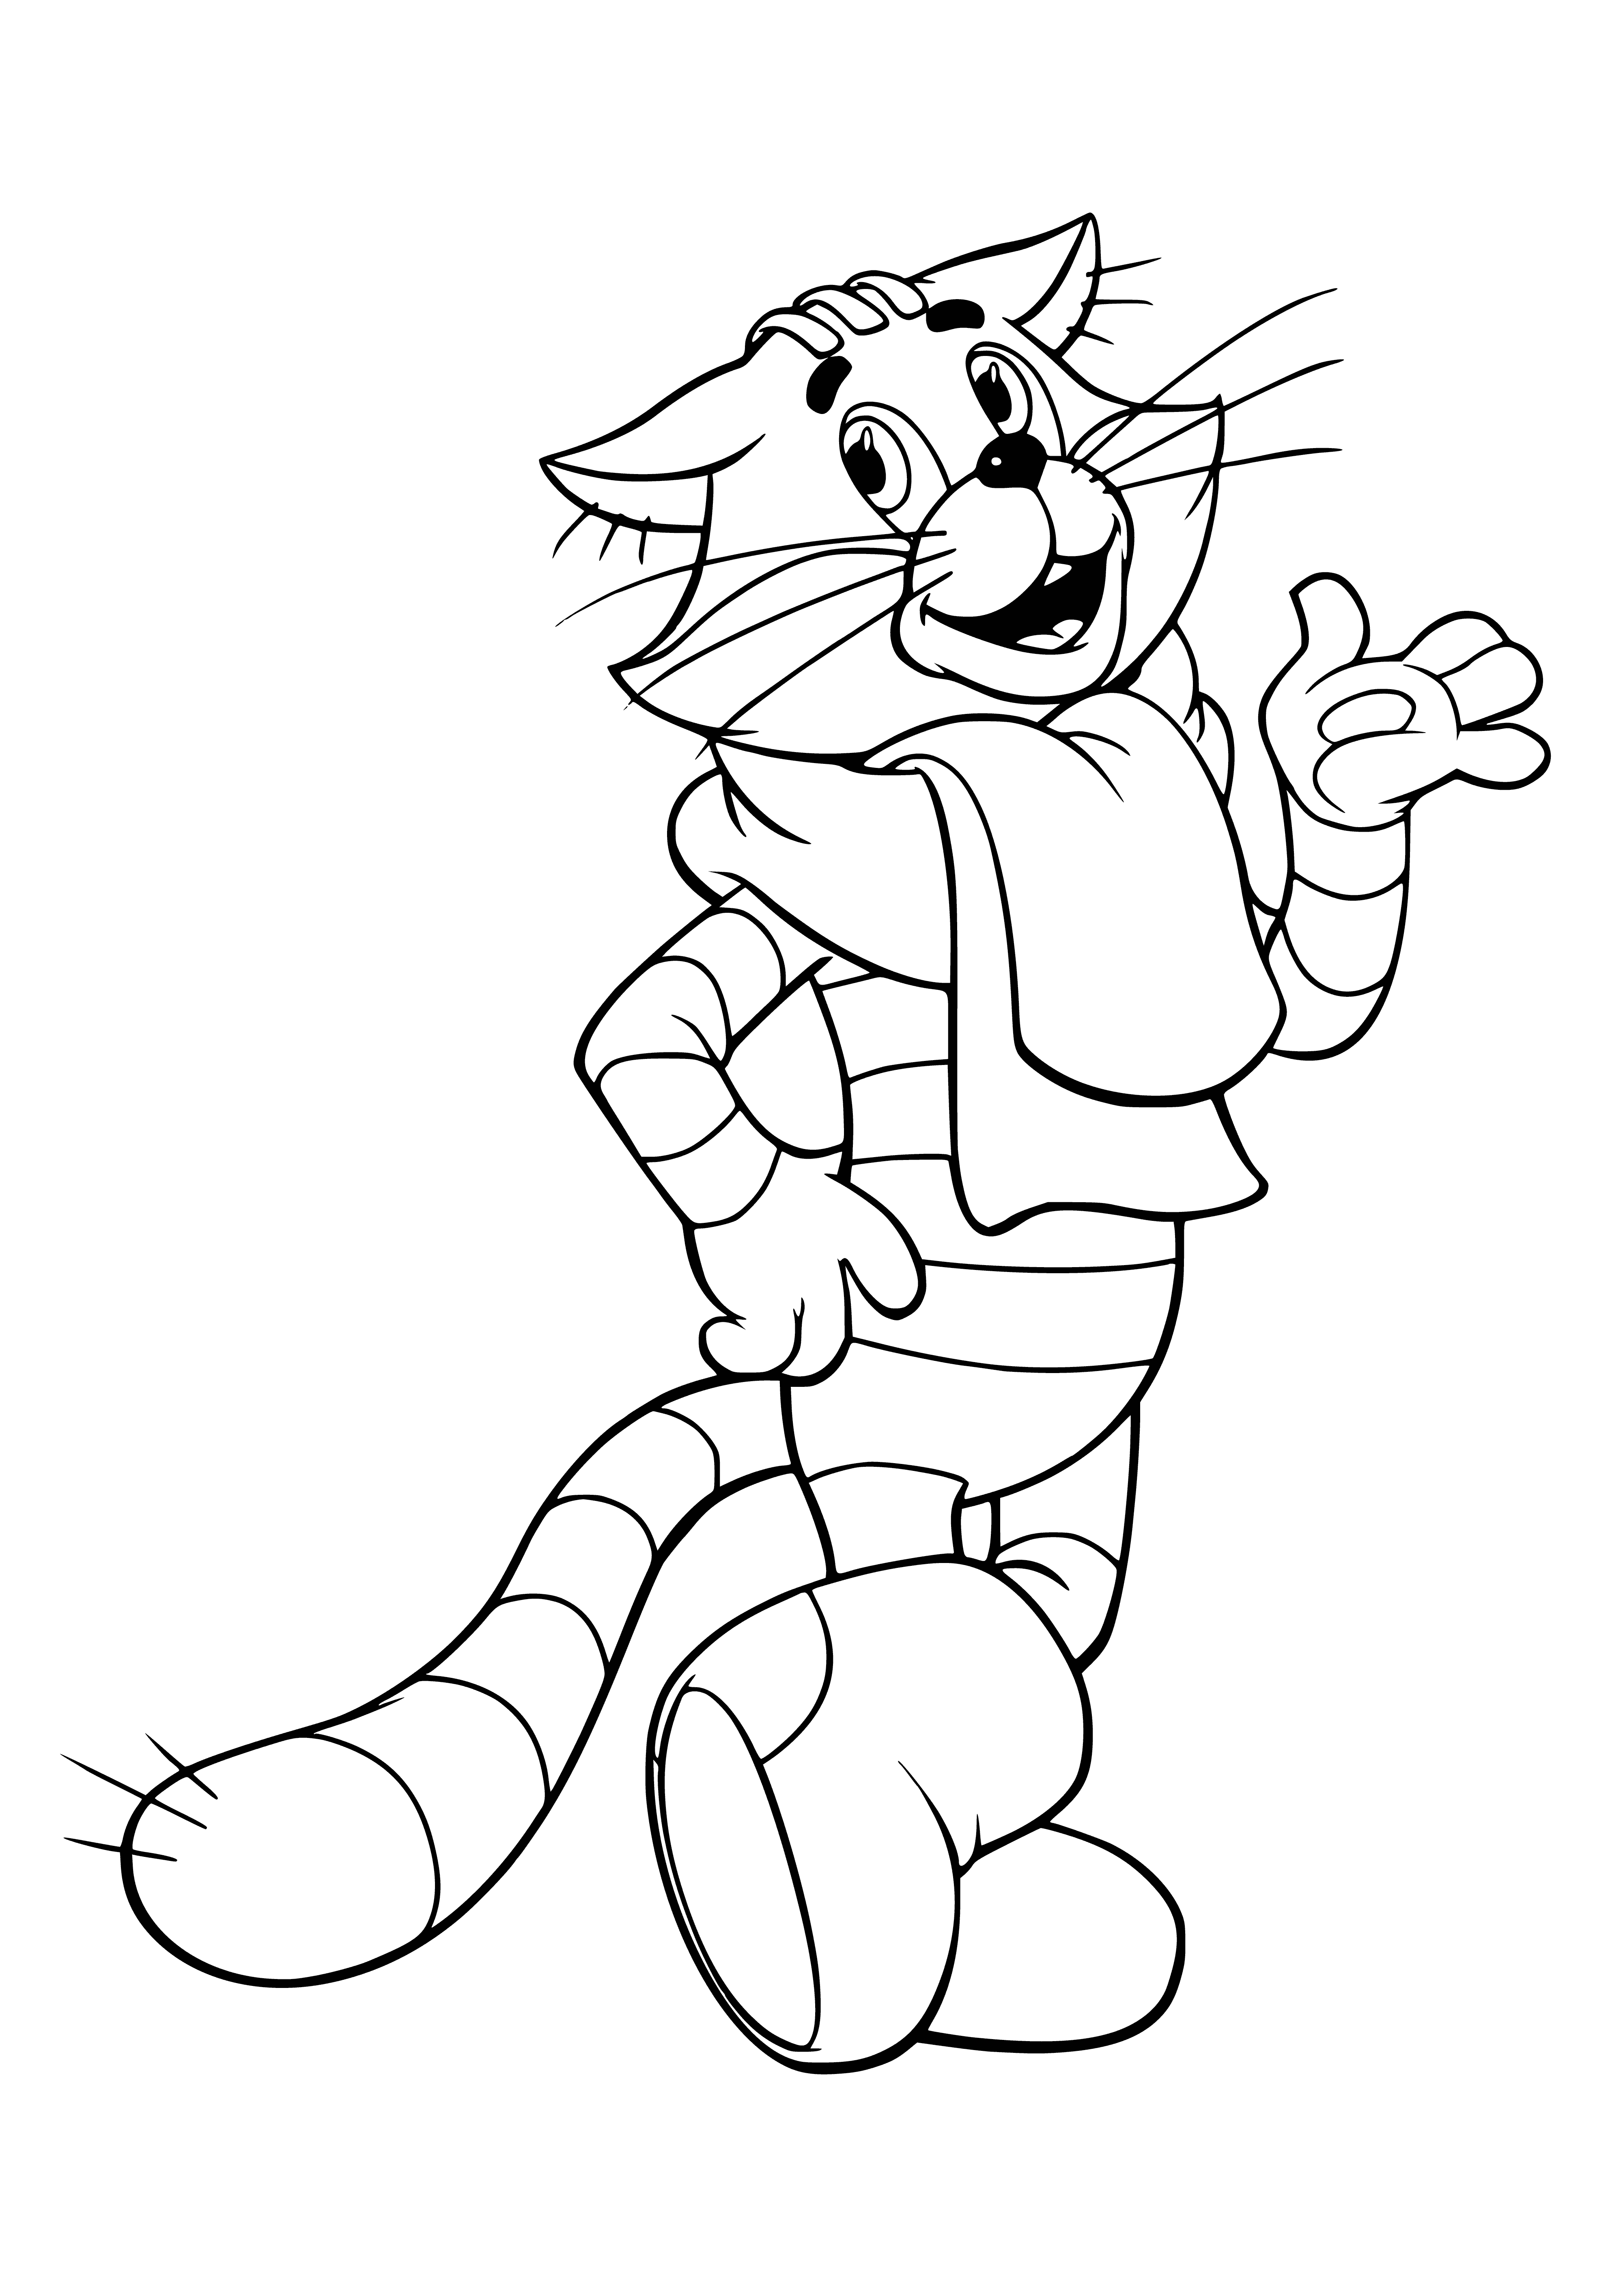 Famous Russian cat Matroskin is in a coloring page - an orange feline waiting to be brought to life!